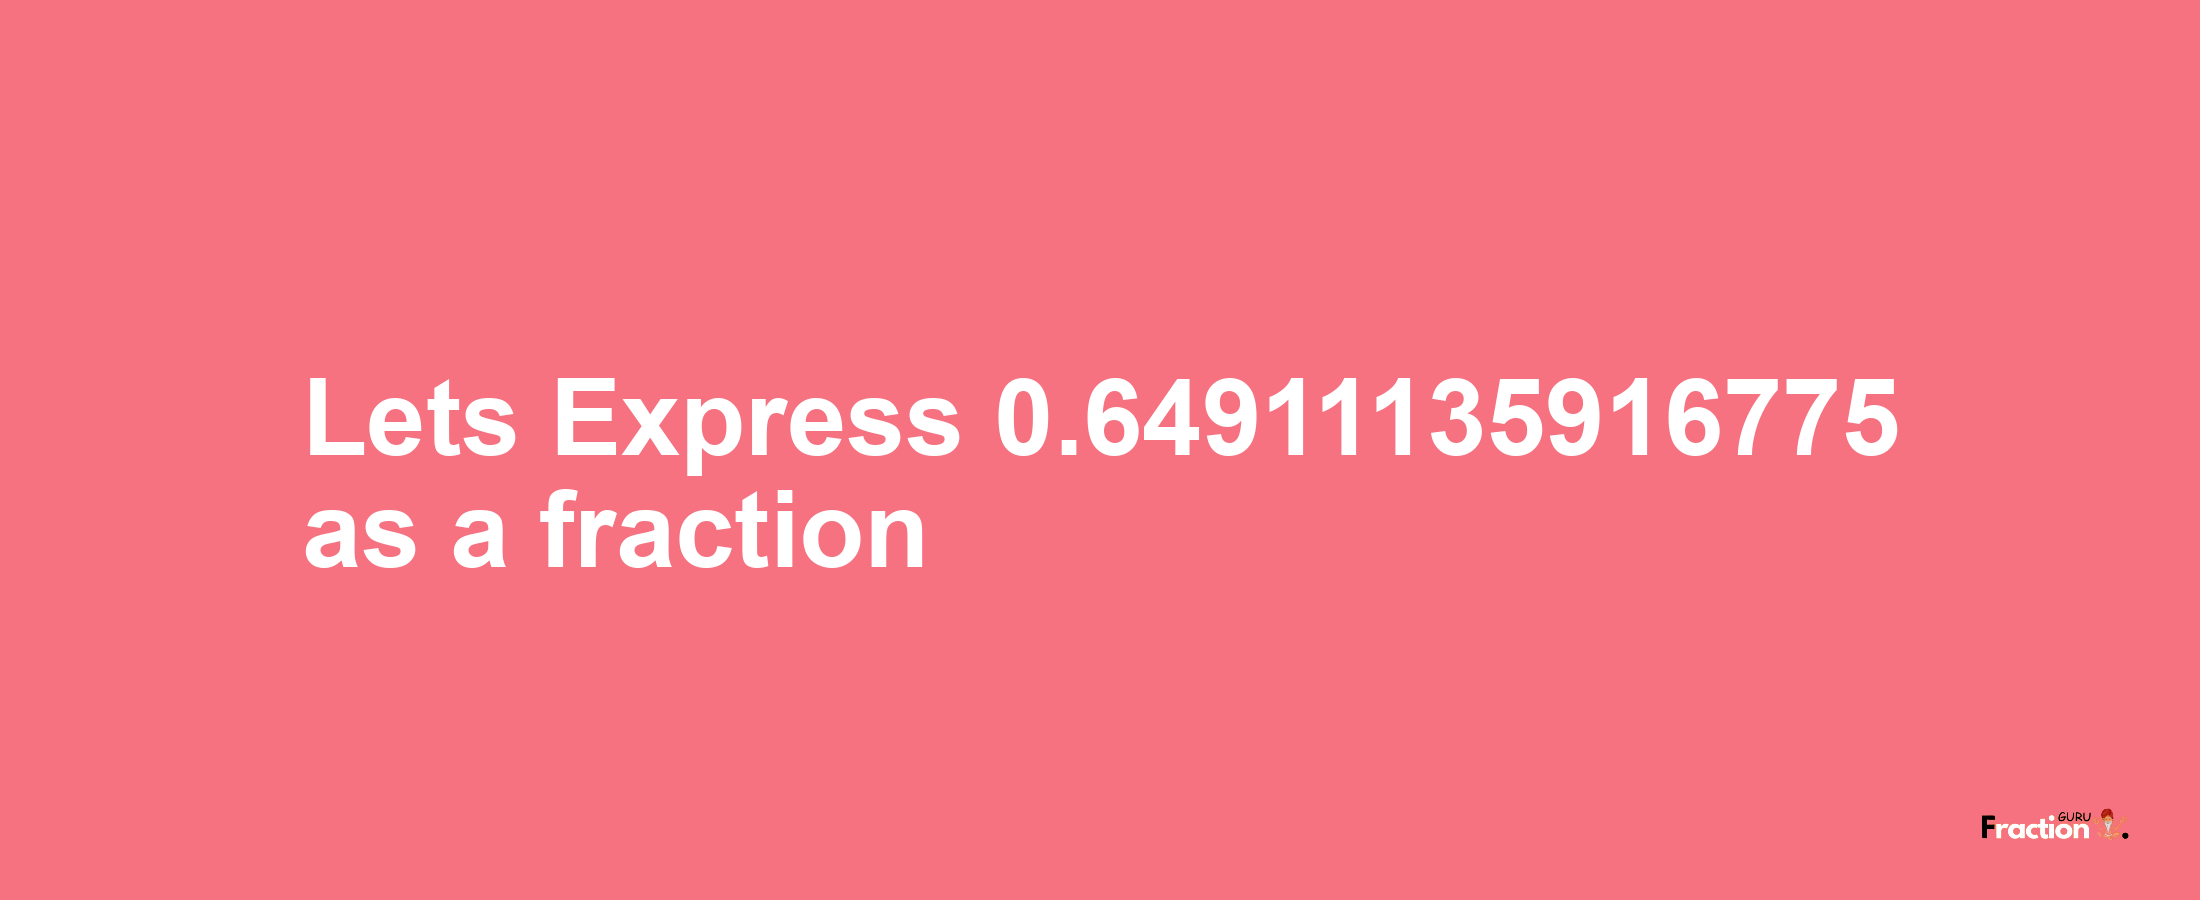 Lets Express 0.64911135916775 as afraction